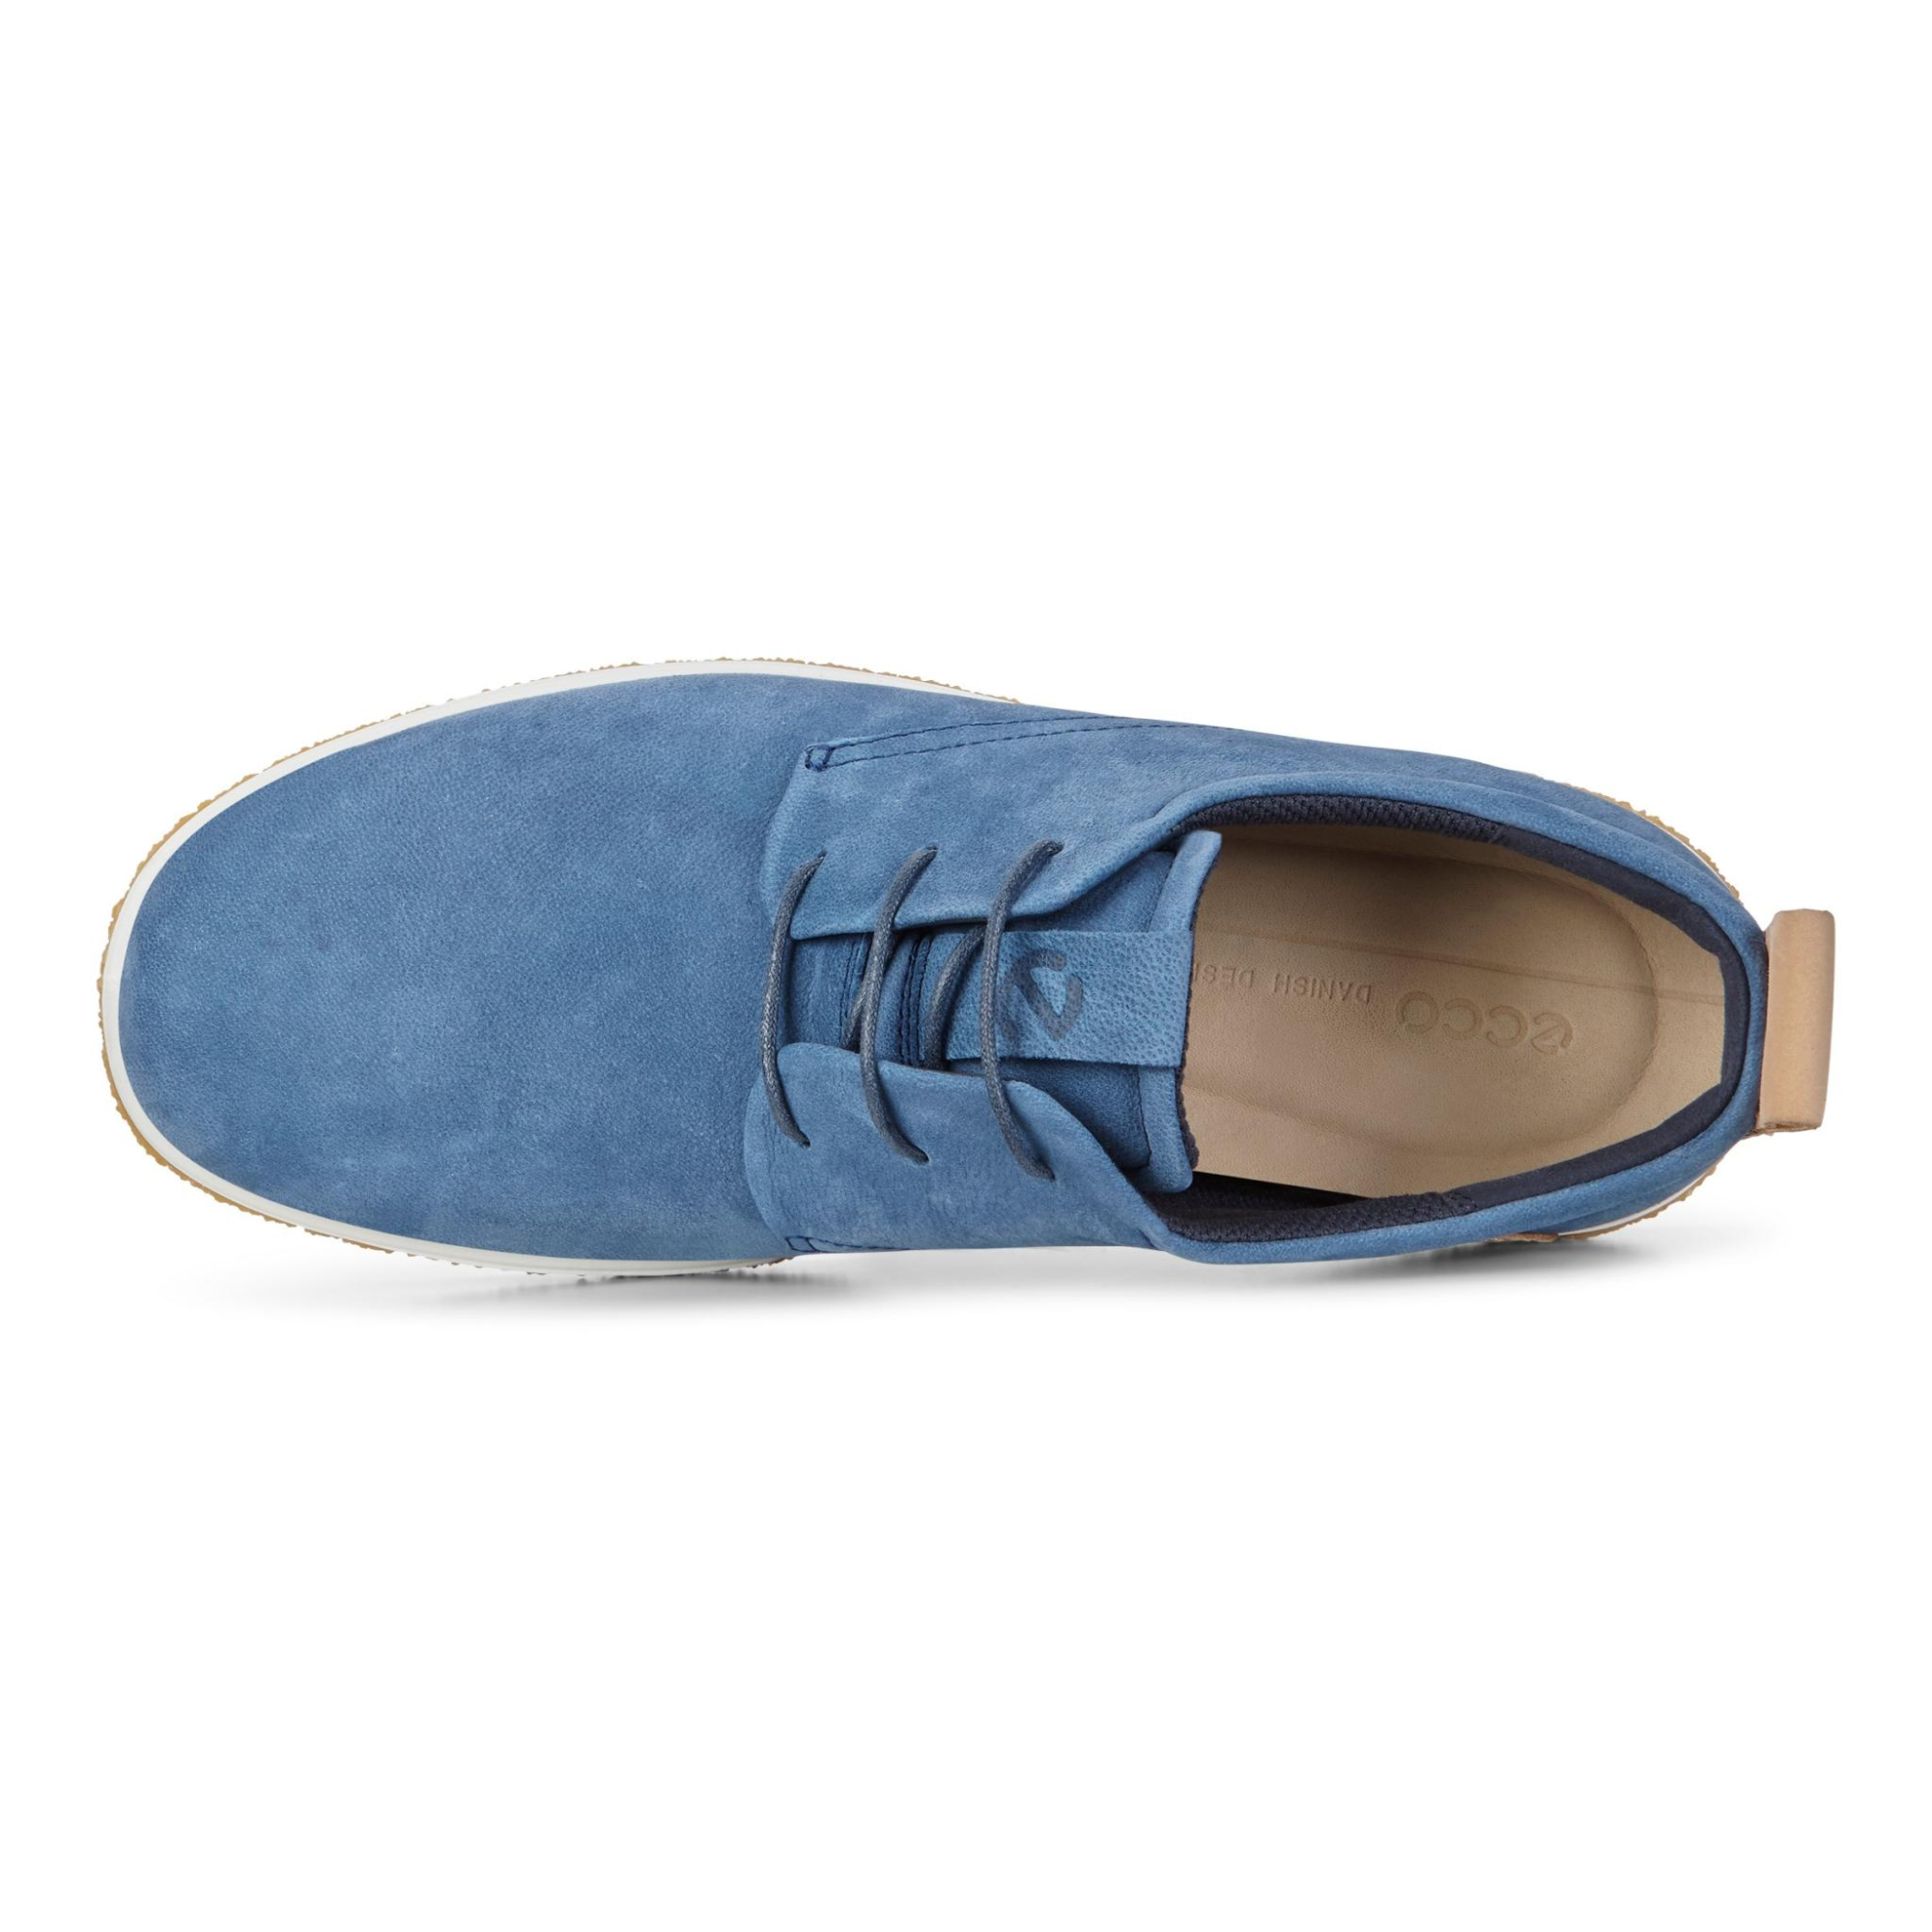 Mens Crepetray Derby Tie 39 - - Veryk Mall - Veryk Mall, many product, quick response, your money!